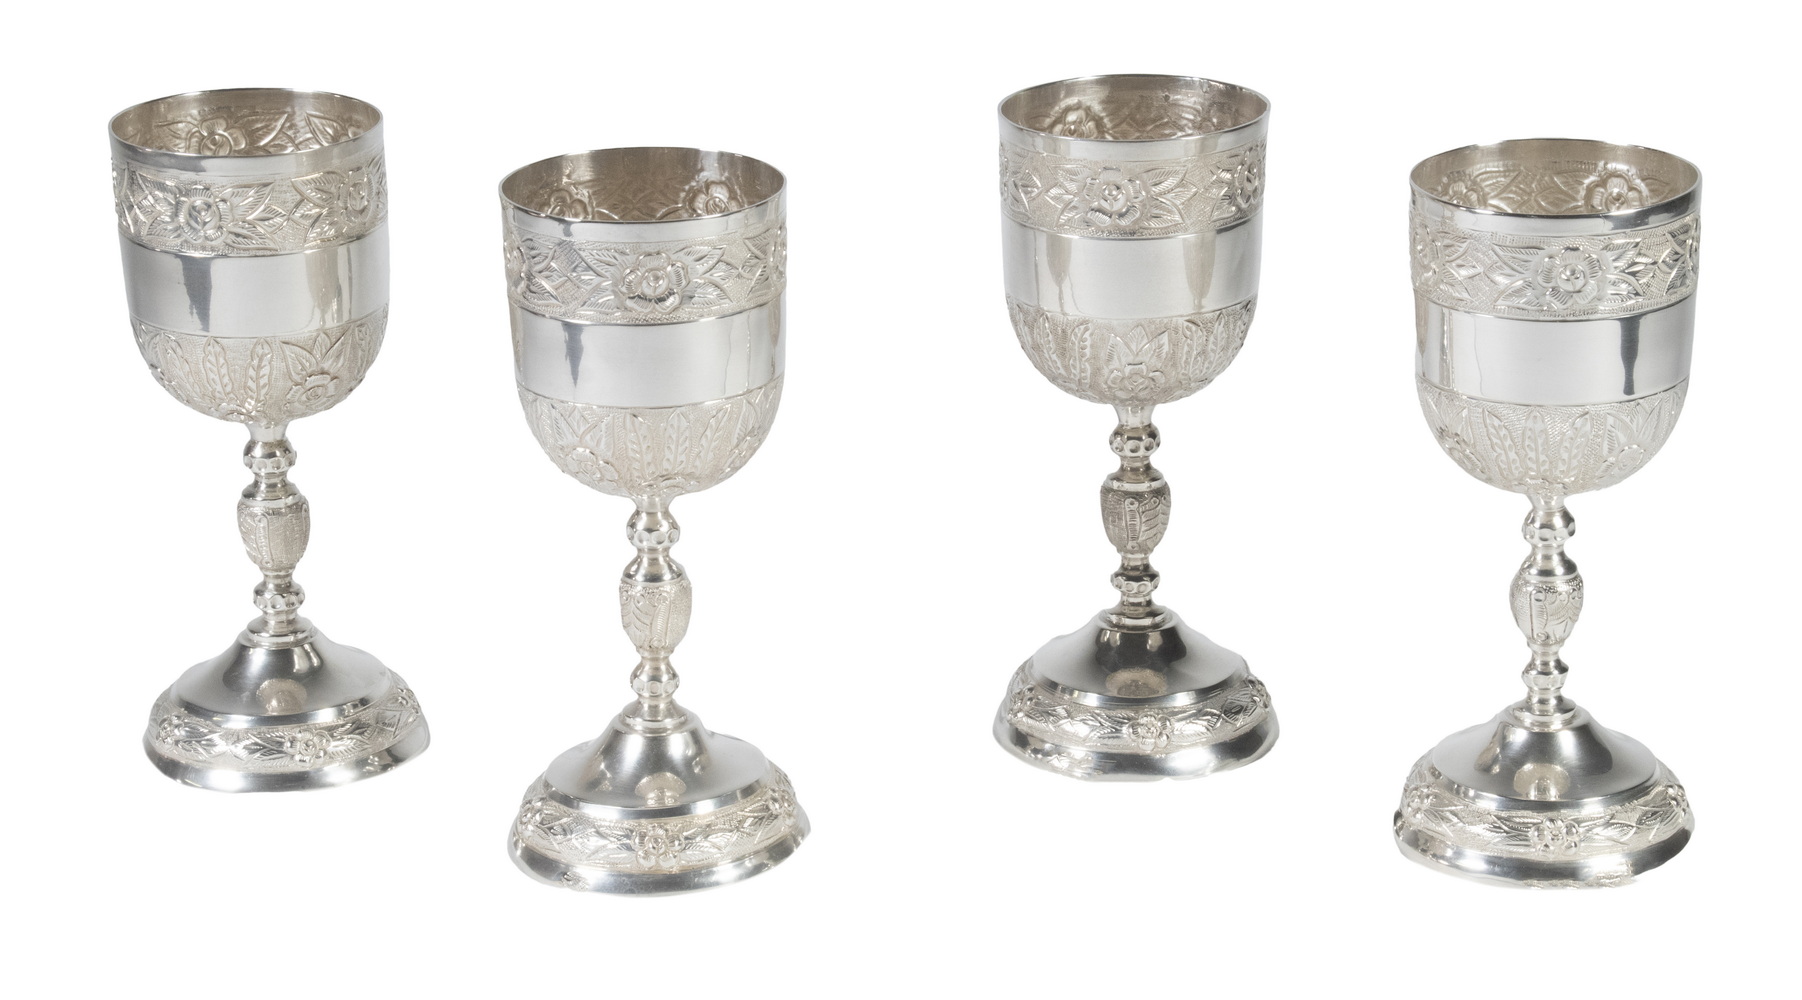 SANBORN S MEXICAN STERLING GOBLETS 302c26